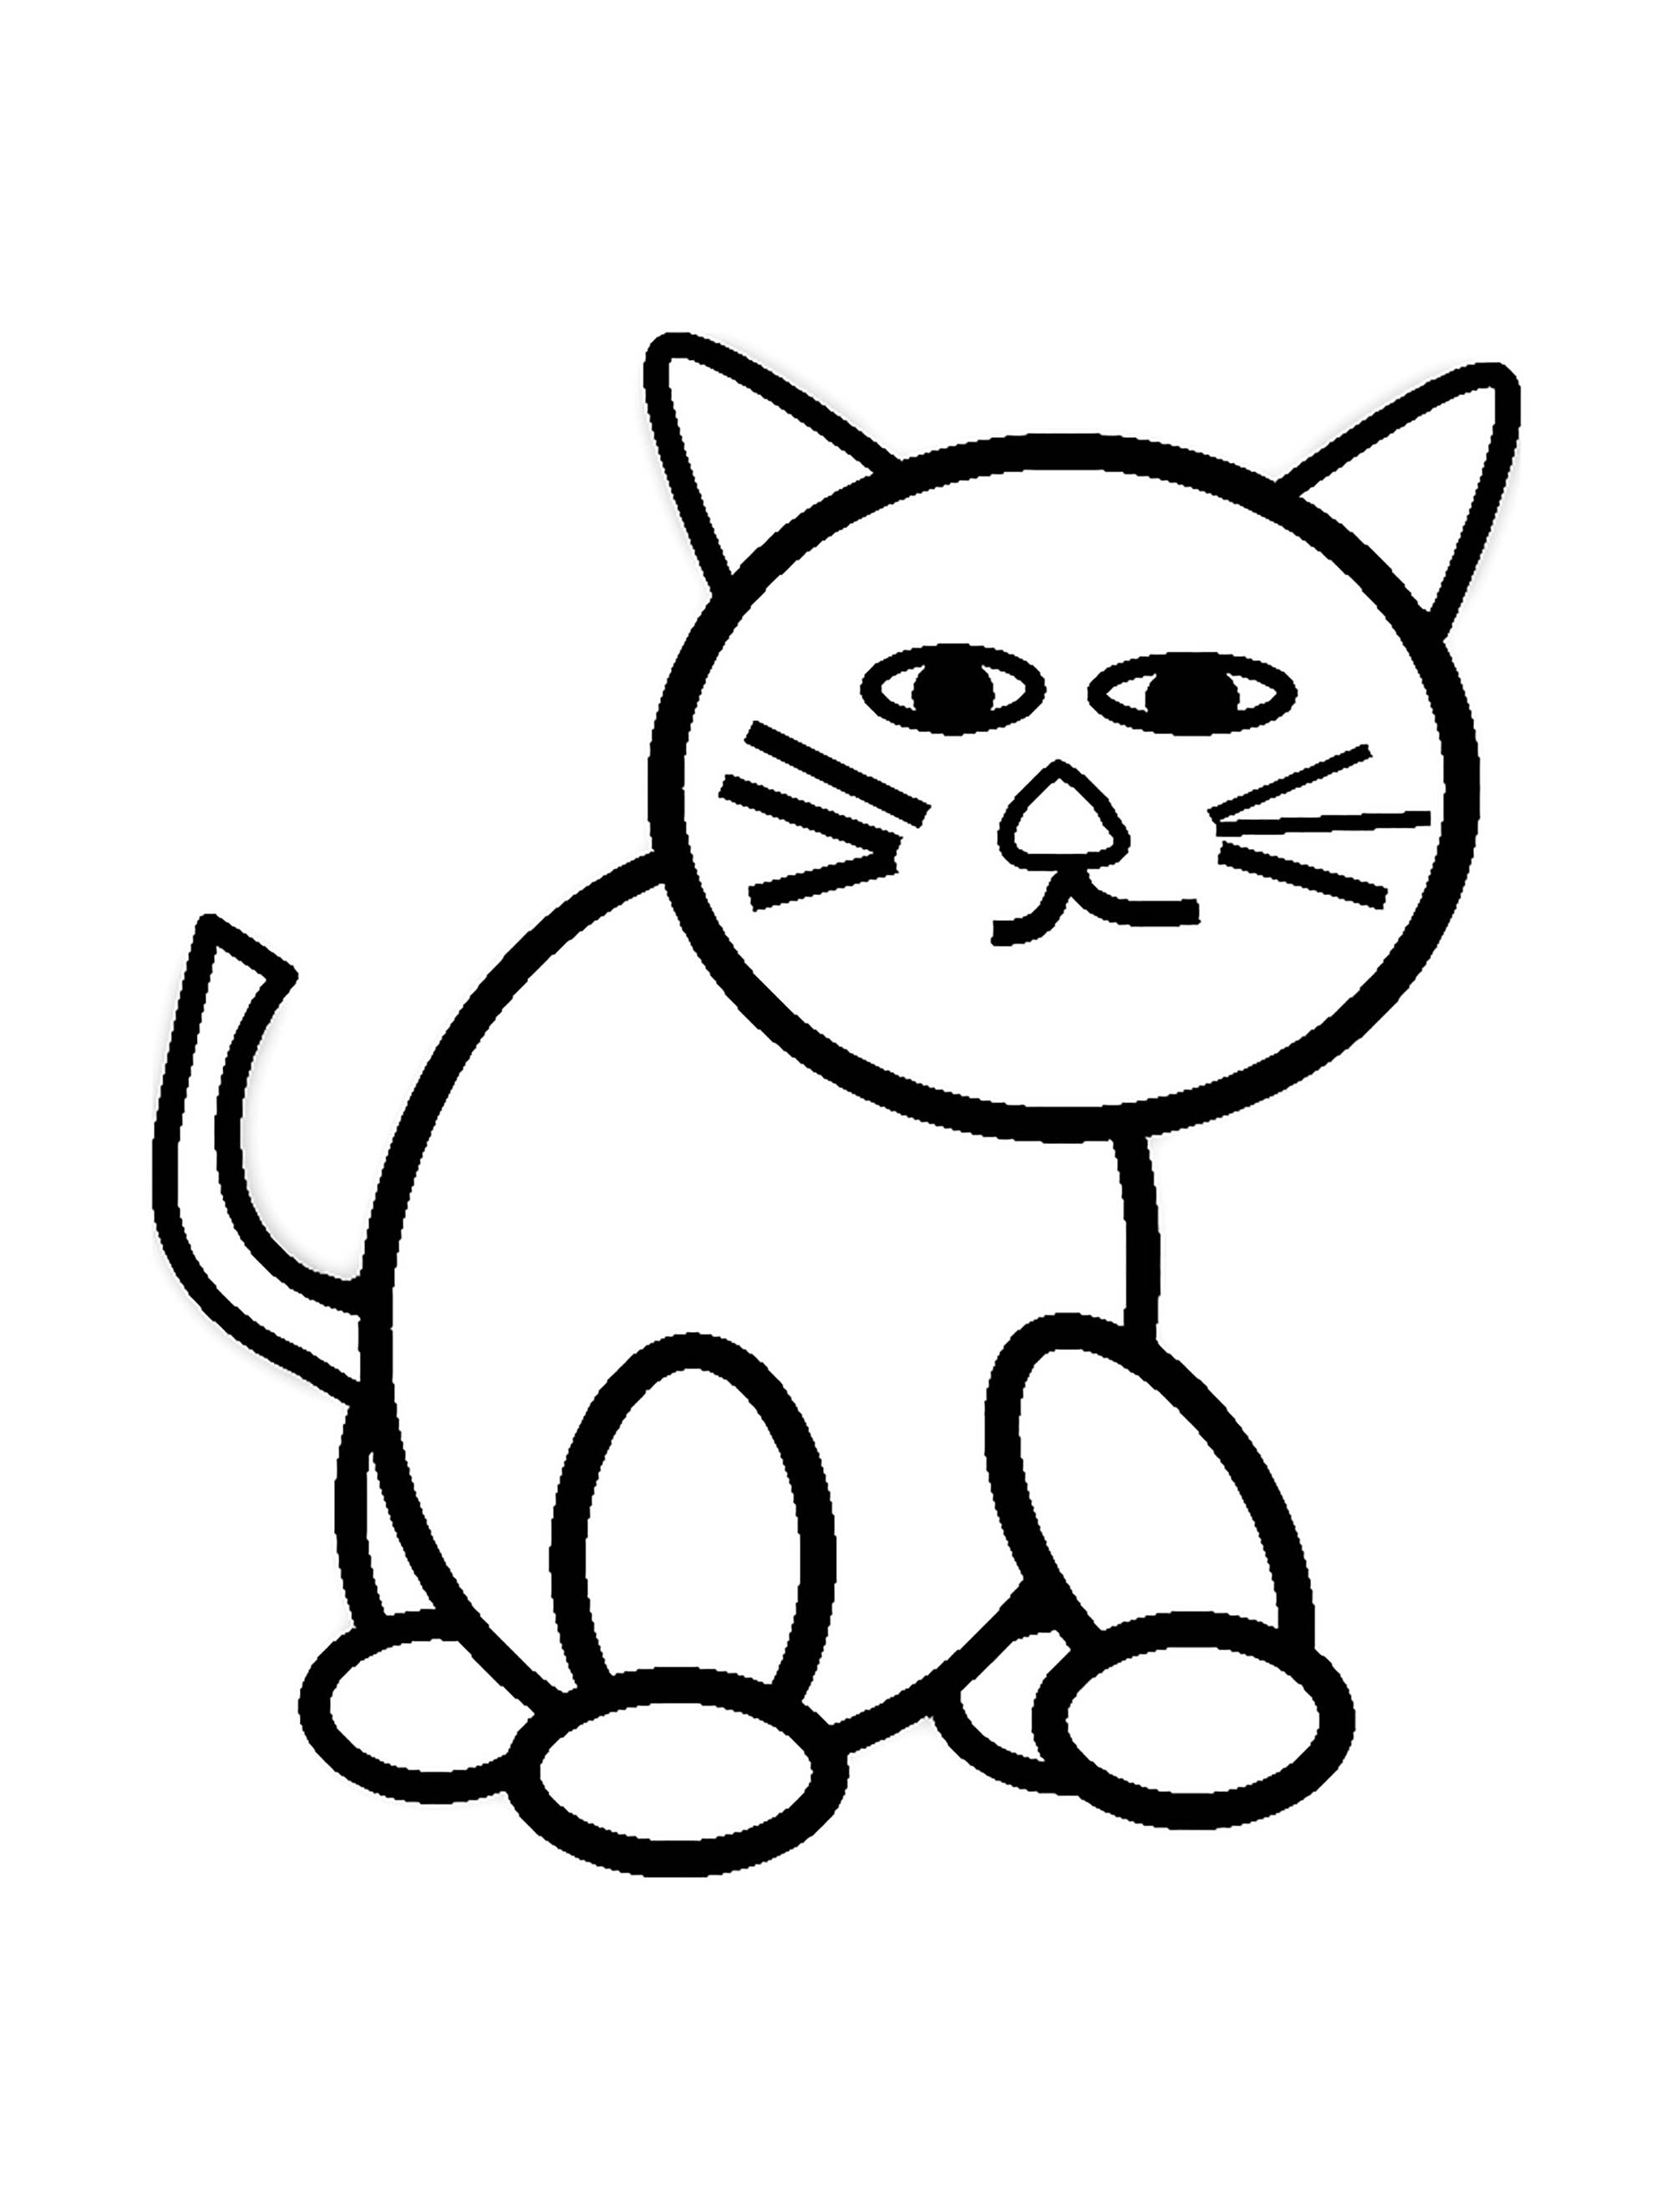 Download Cat for kids : simple drawing - Cats Kids Coloring Pages